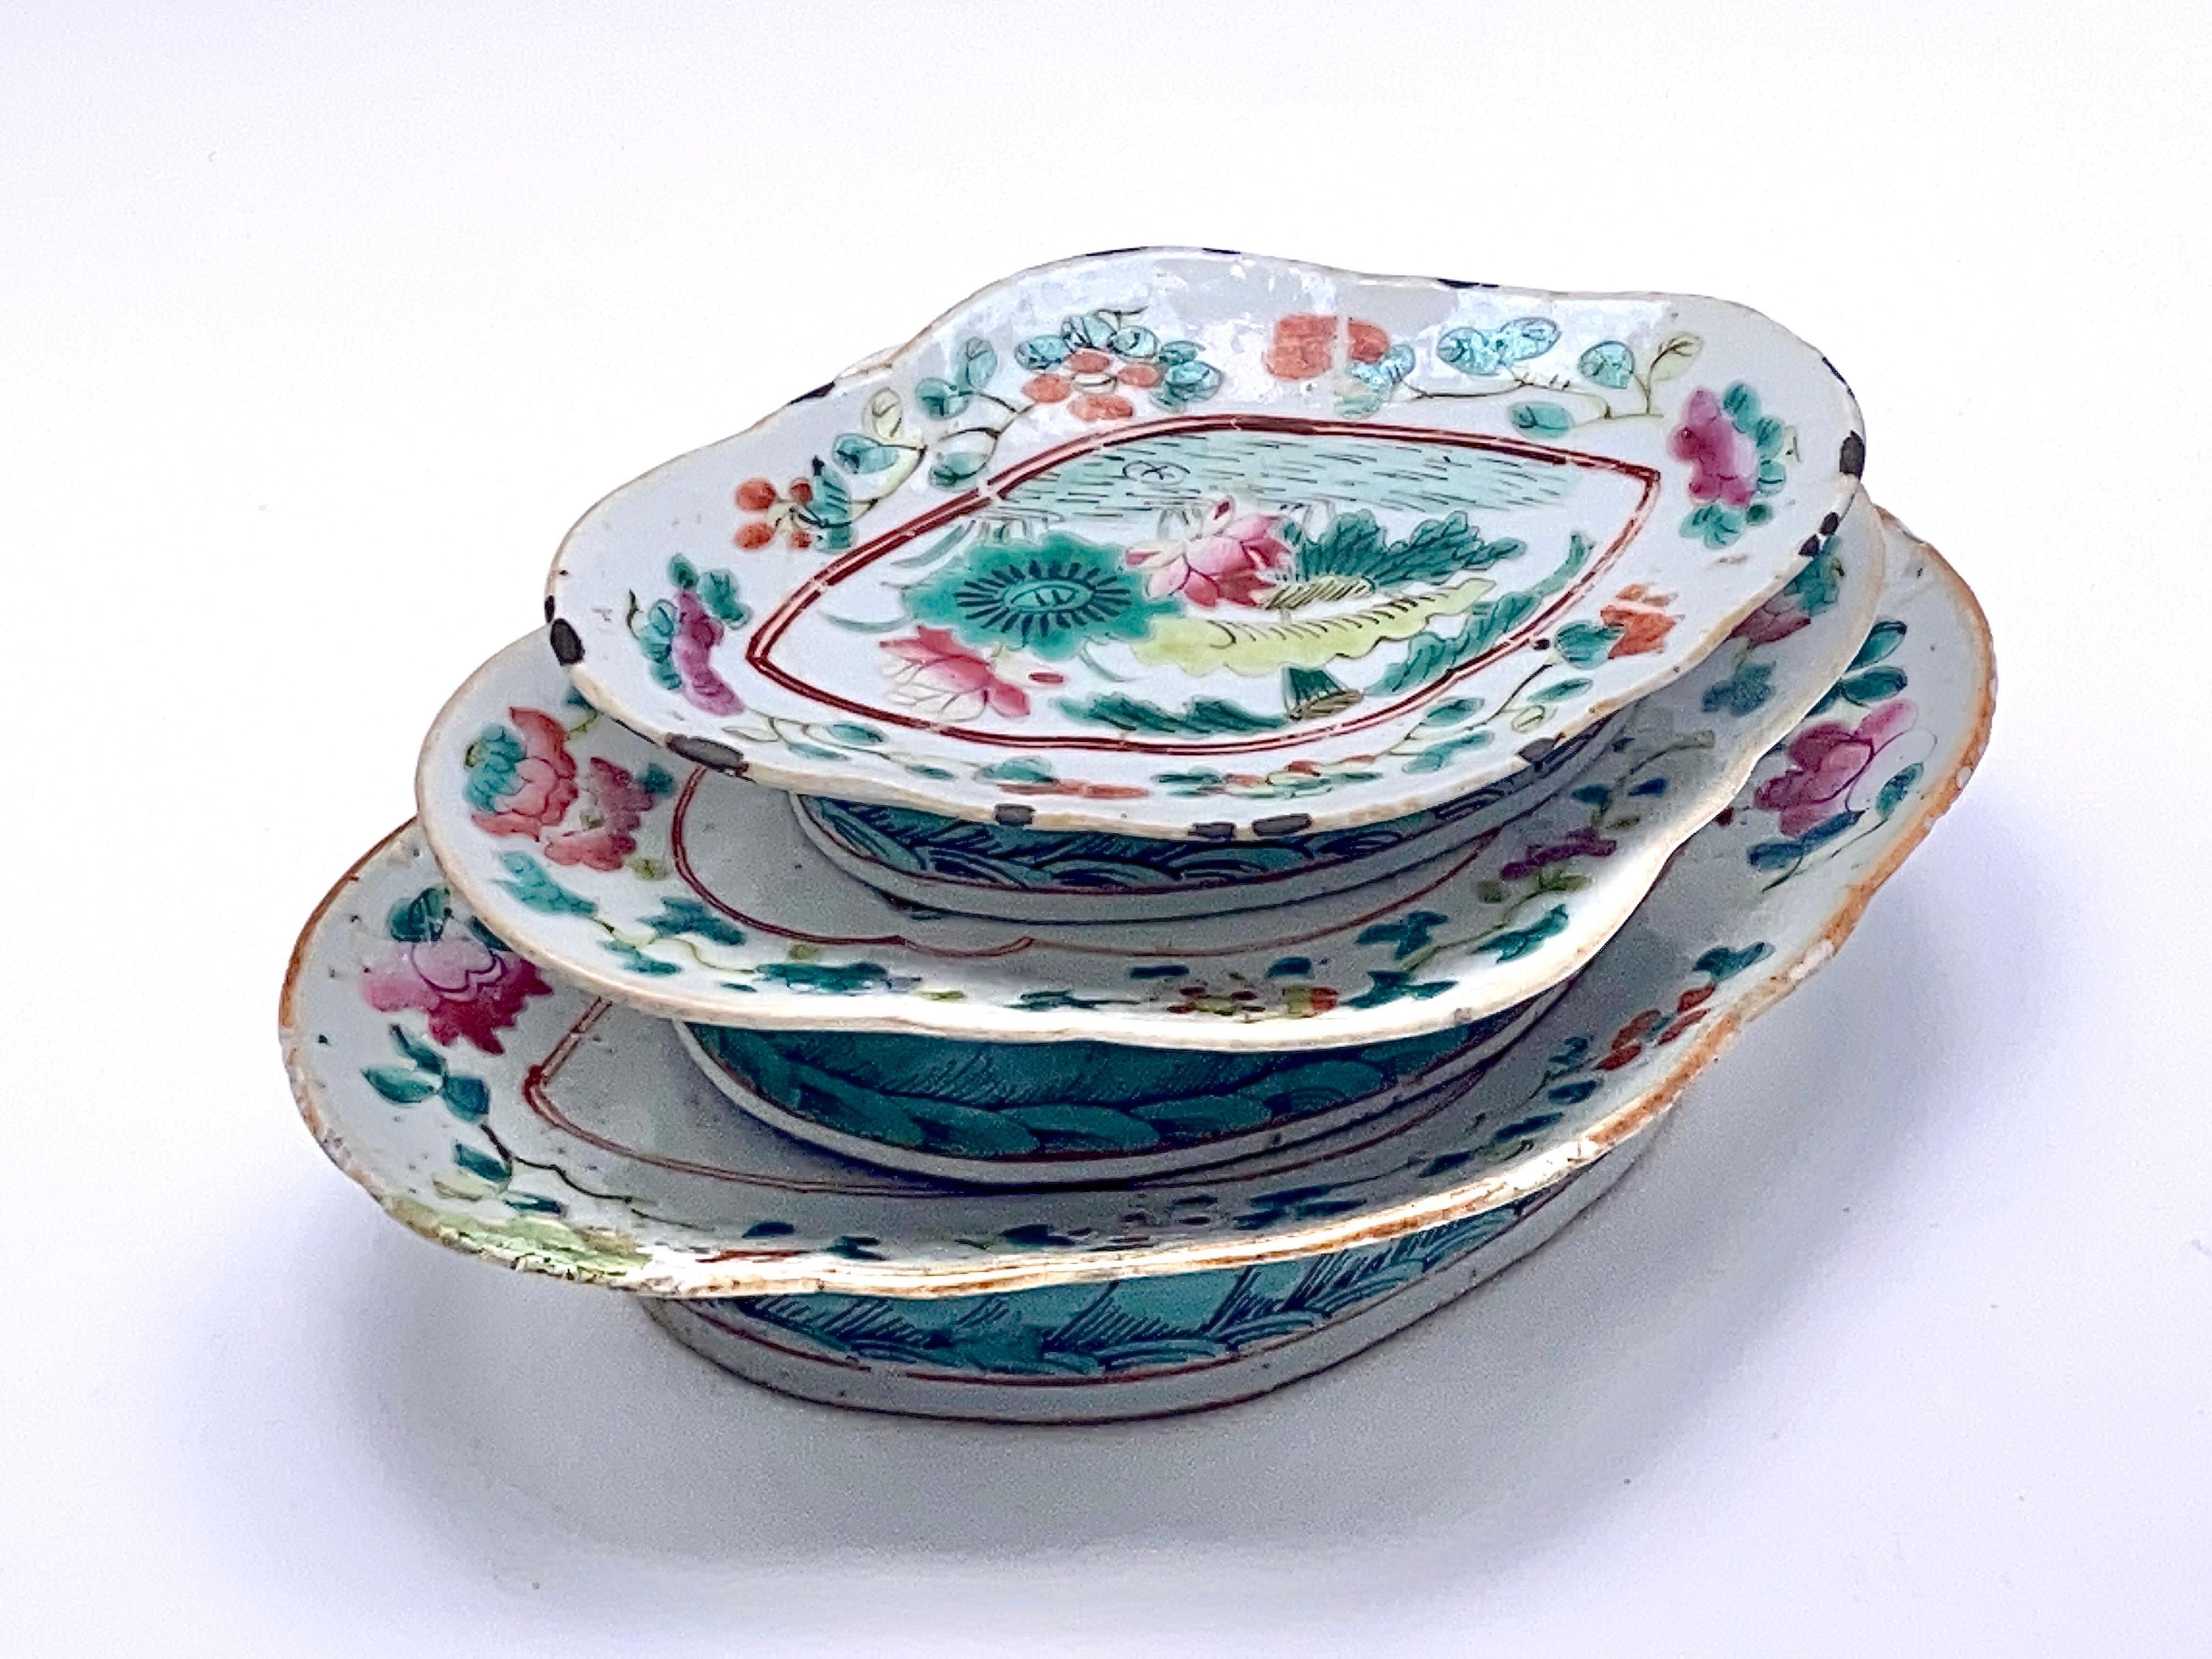 This 19th century dish is an unusual scalloped form. It shows wear but it in excellent condition. 
This colorful porcelain bowls dates to the mid-19th century and was originally used as a serving dish for ritual offerings, placed before a home